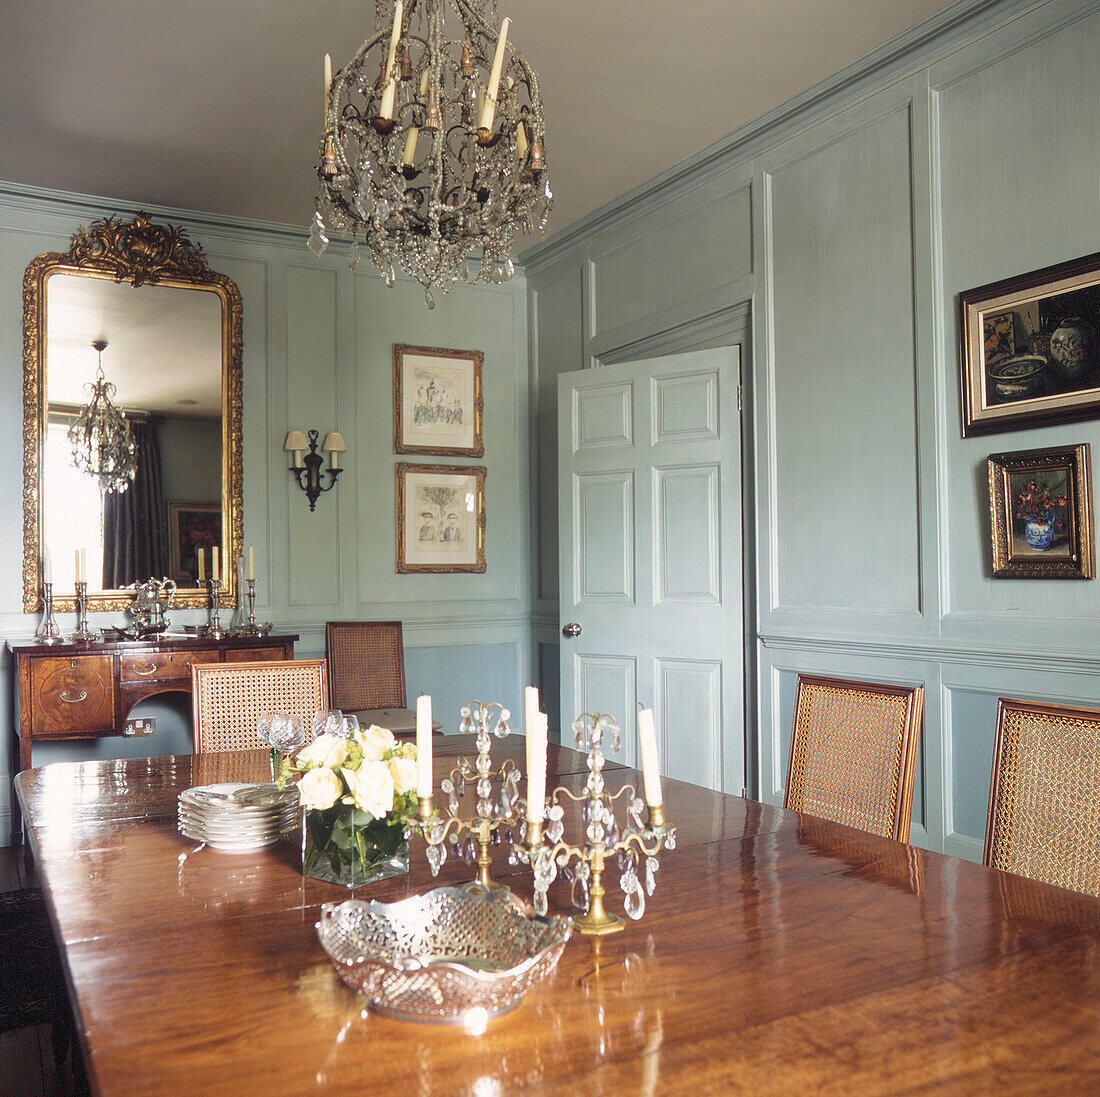 Elegant panelled dining room with formal Georgian dining table